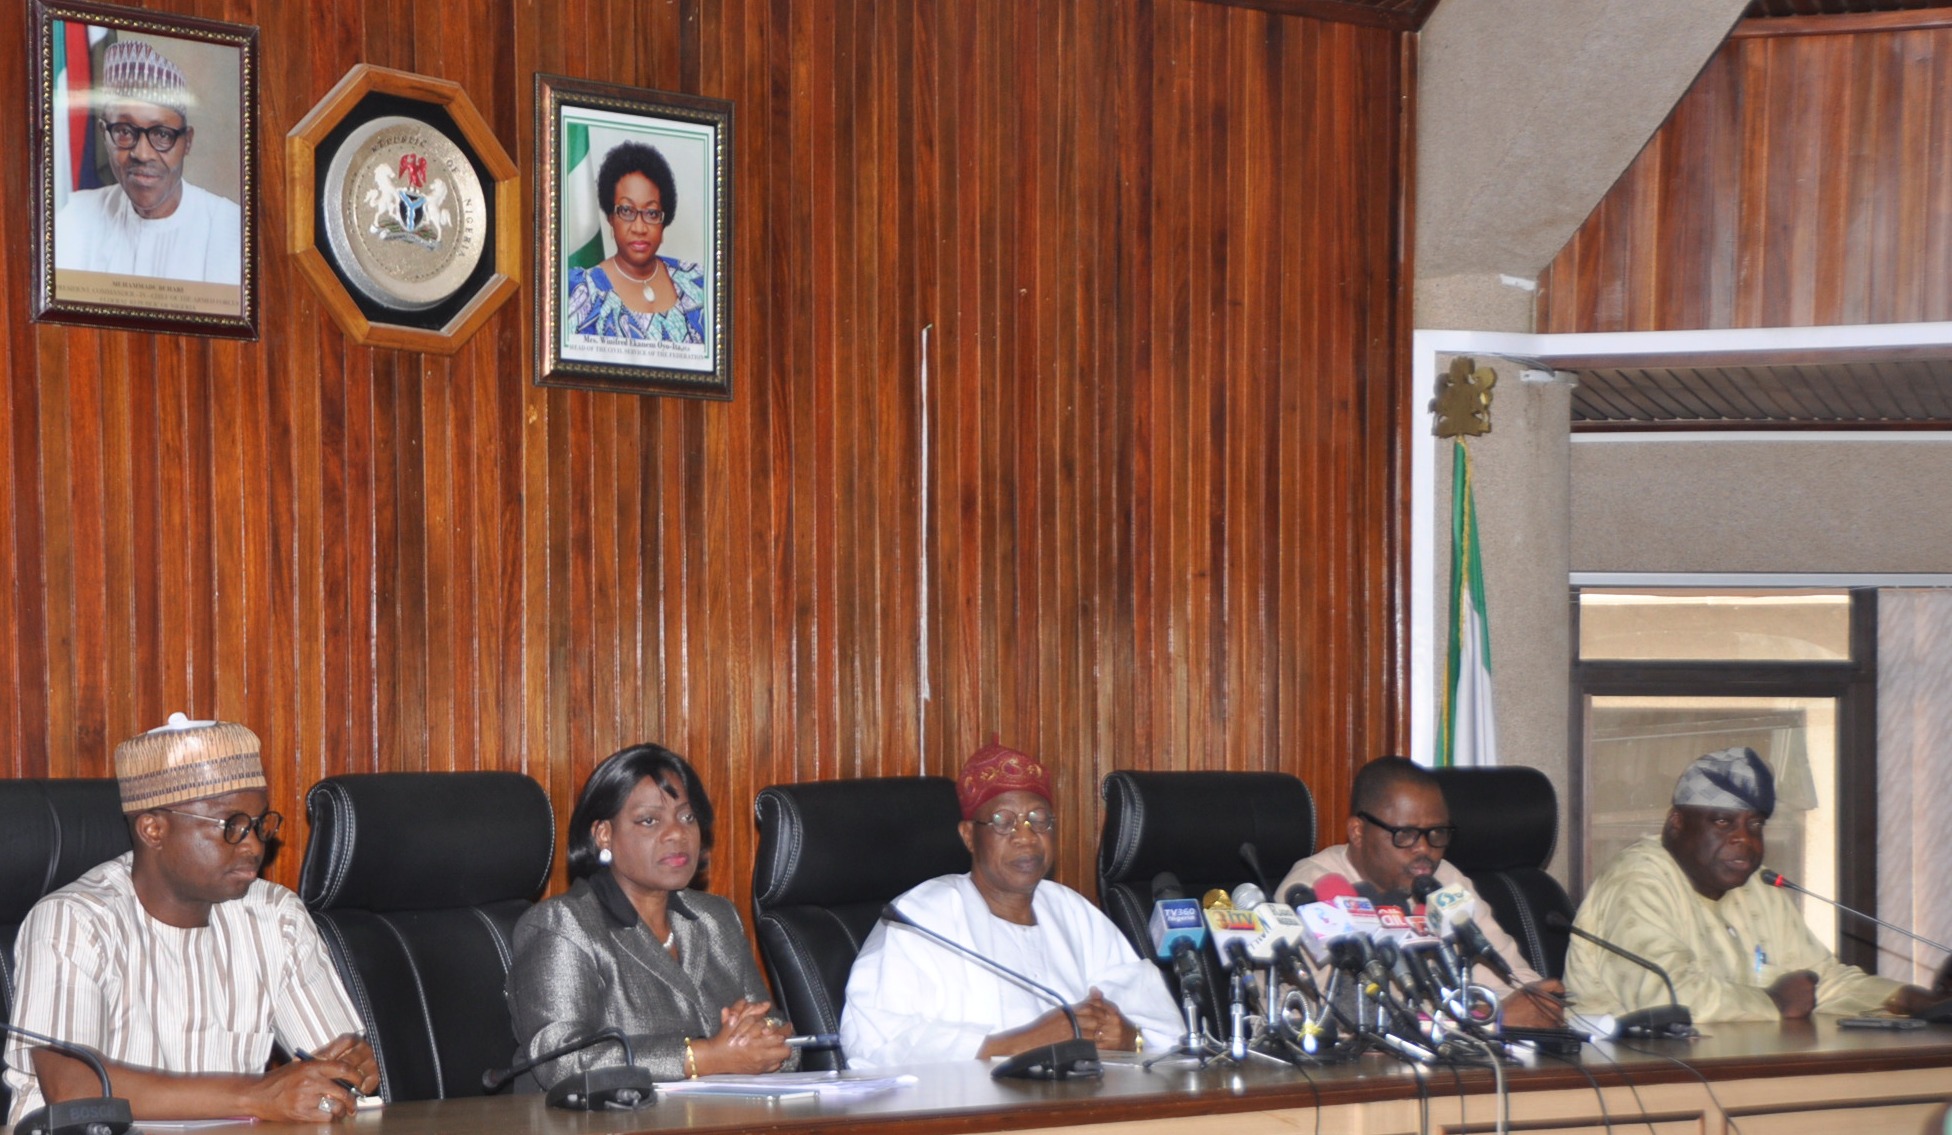 Minister of Information and Culture, Alhaji Lai Mohammed, flanked by the Permanent Secretary in the Ministry, Mrs Ayo Adesugba, Special Assistants Segun Adeyemi and Williams Adeleye and Director in the Ministry Peter Dama, at a press conference addressed by the Minister in Abuja on Friday